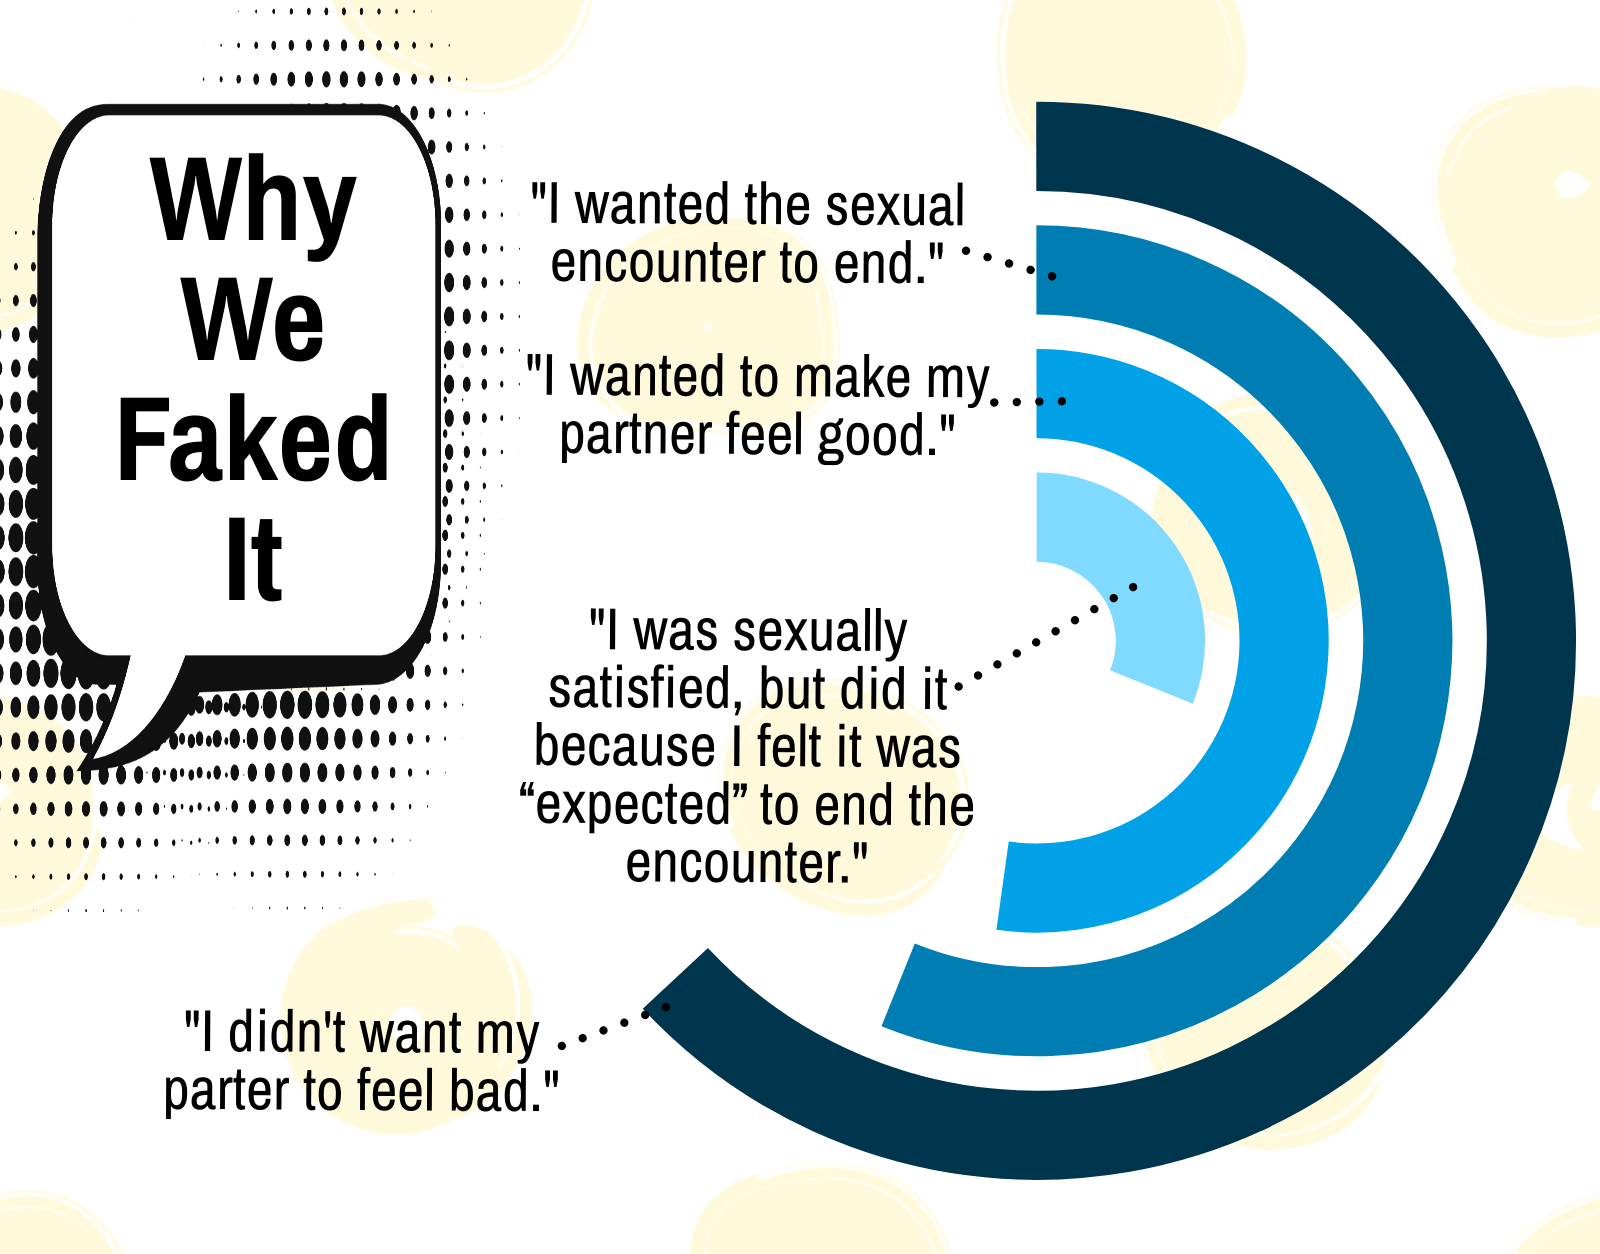 Why we faked orgasm results